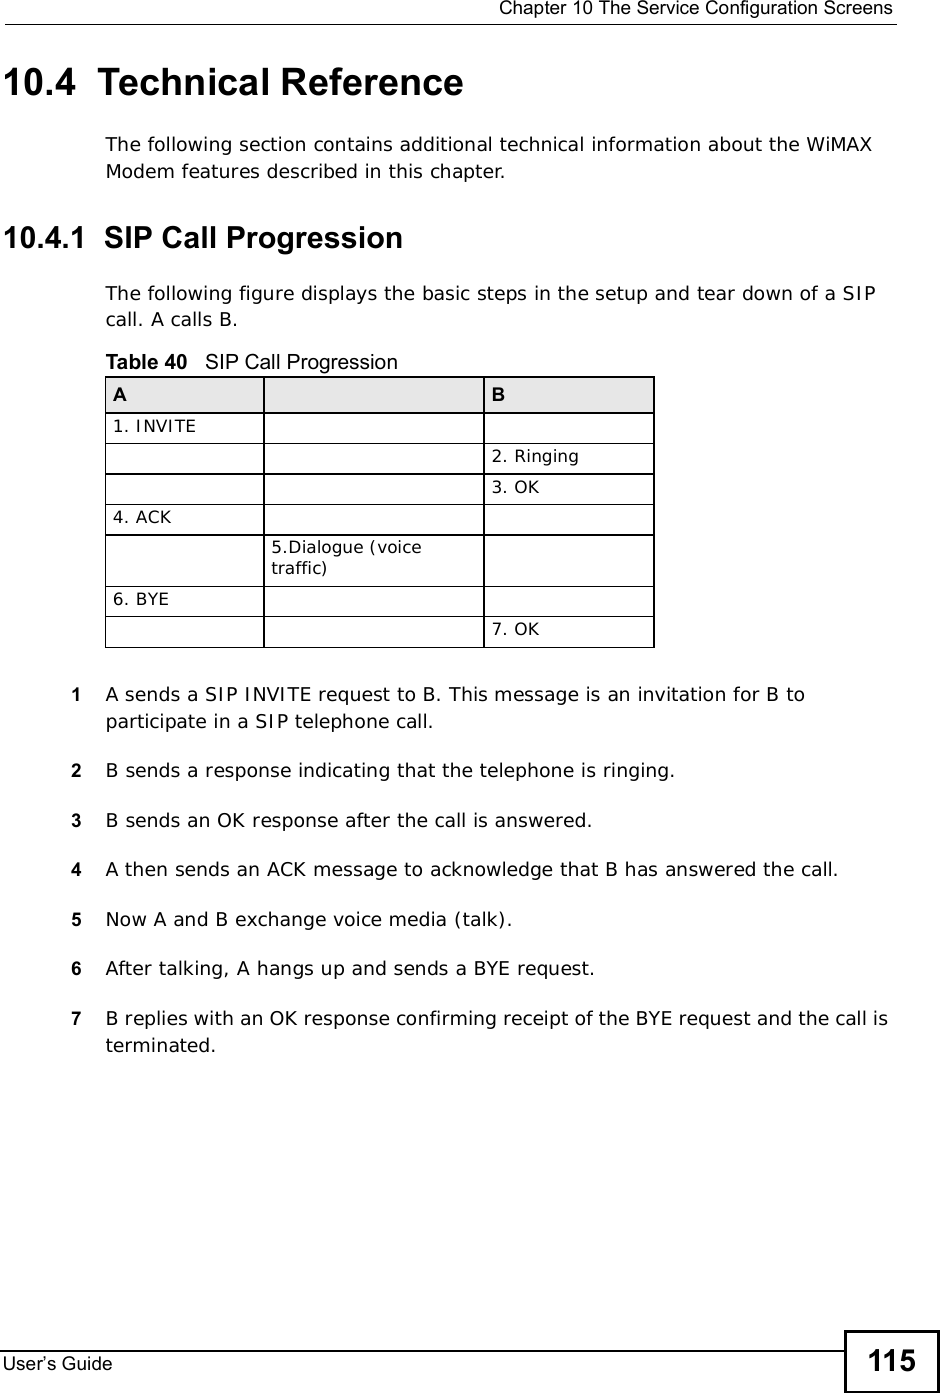  Chapter 10The Service Configuration ScreensUser s Guide 11510.4  Technical ReferenceThe following section contains additional technical information about the WiMAX Modem features described in this chapter.10.4.1  SIP Call ProgressionThe following figure displays the basic steps in the setup and tear down of a SIP call. A calls B. 1A sends a SIP INVITE request to B. This message is an invitation for B to participate in a SIP telephone call. 2B sends a response indicating that the telephone is ringing.3B sends an OK response after the call is answered. 4A then sends an ACK message to acknowledge that B has answered the call. 5Now A and B exchange voice media (talk). 6After talking, A hangs up and sends a BYE request. 7B replies with an OK response confirming receipt of the BYE request and the call is terminated.Table 40   SIP Call ProgressionA B1. INVITE2. Ringing3. OK4. ACK 5.Dialogue (voice traffic)6. BYE7. OK